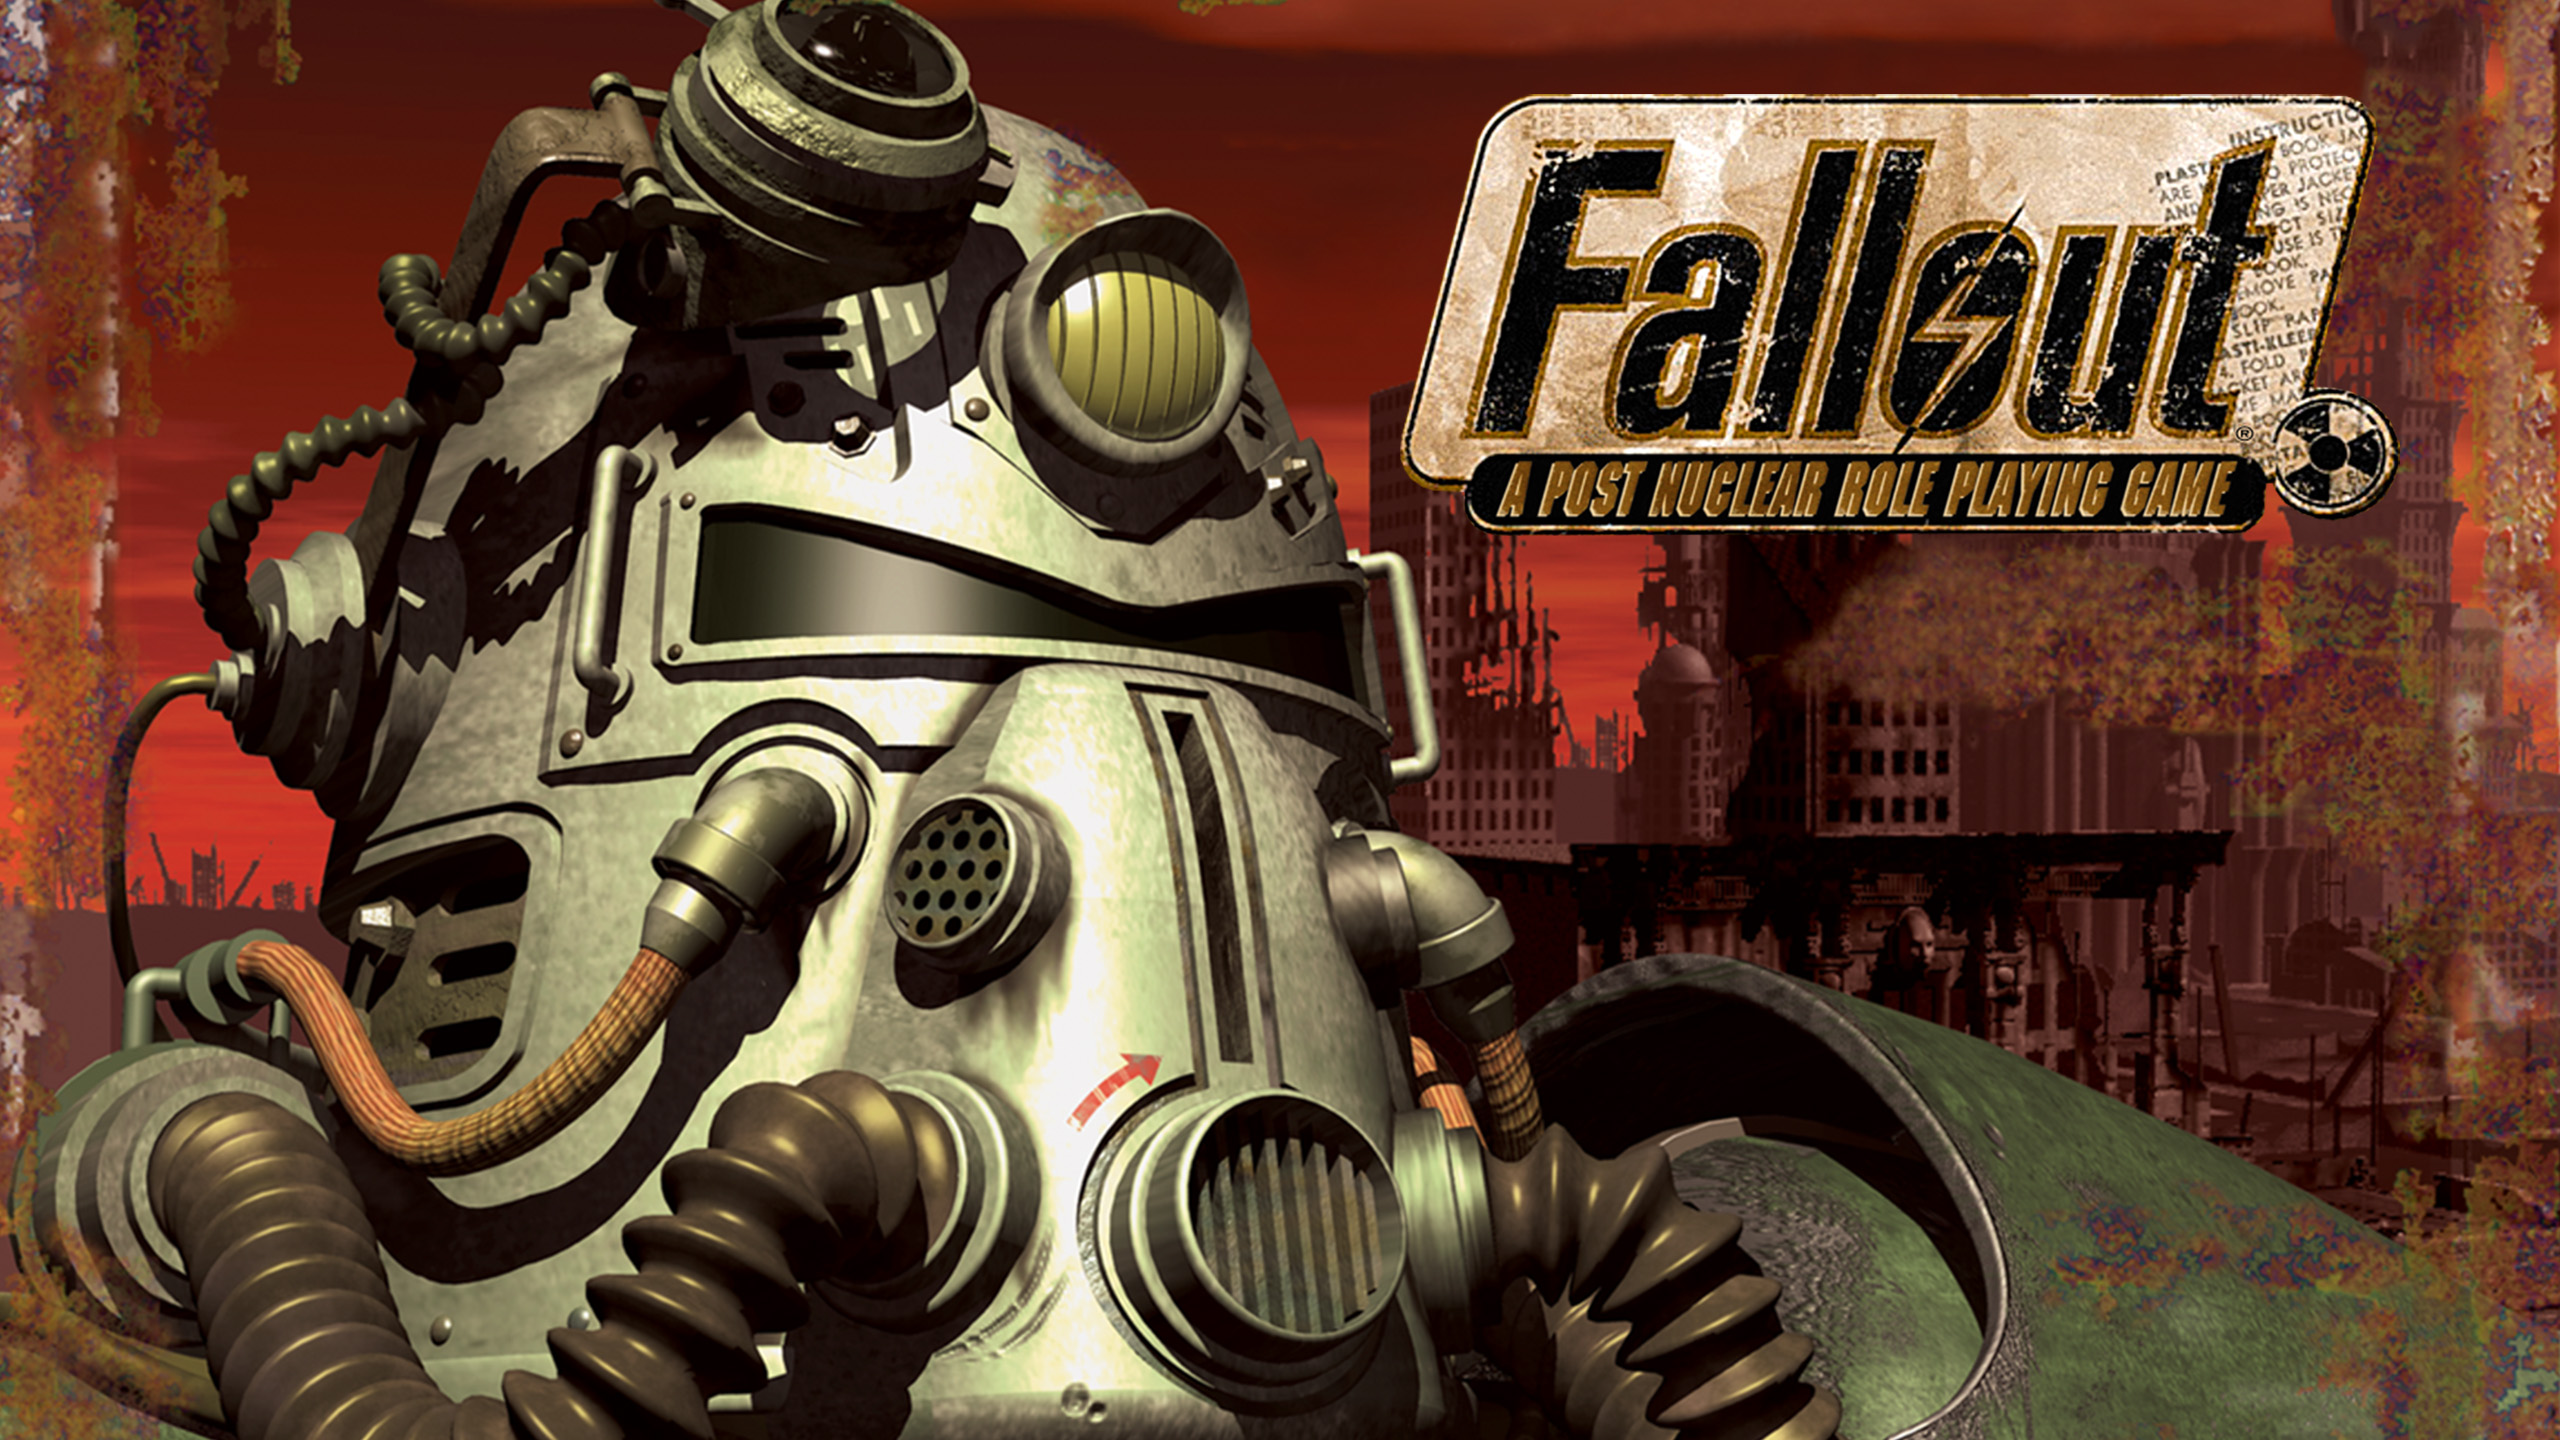 Fallout 4 Download for Android & IOS